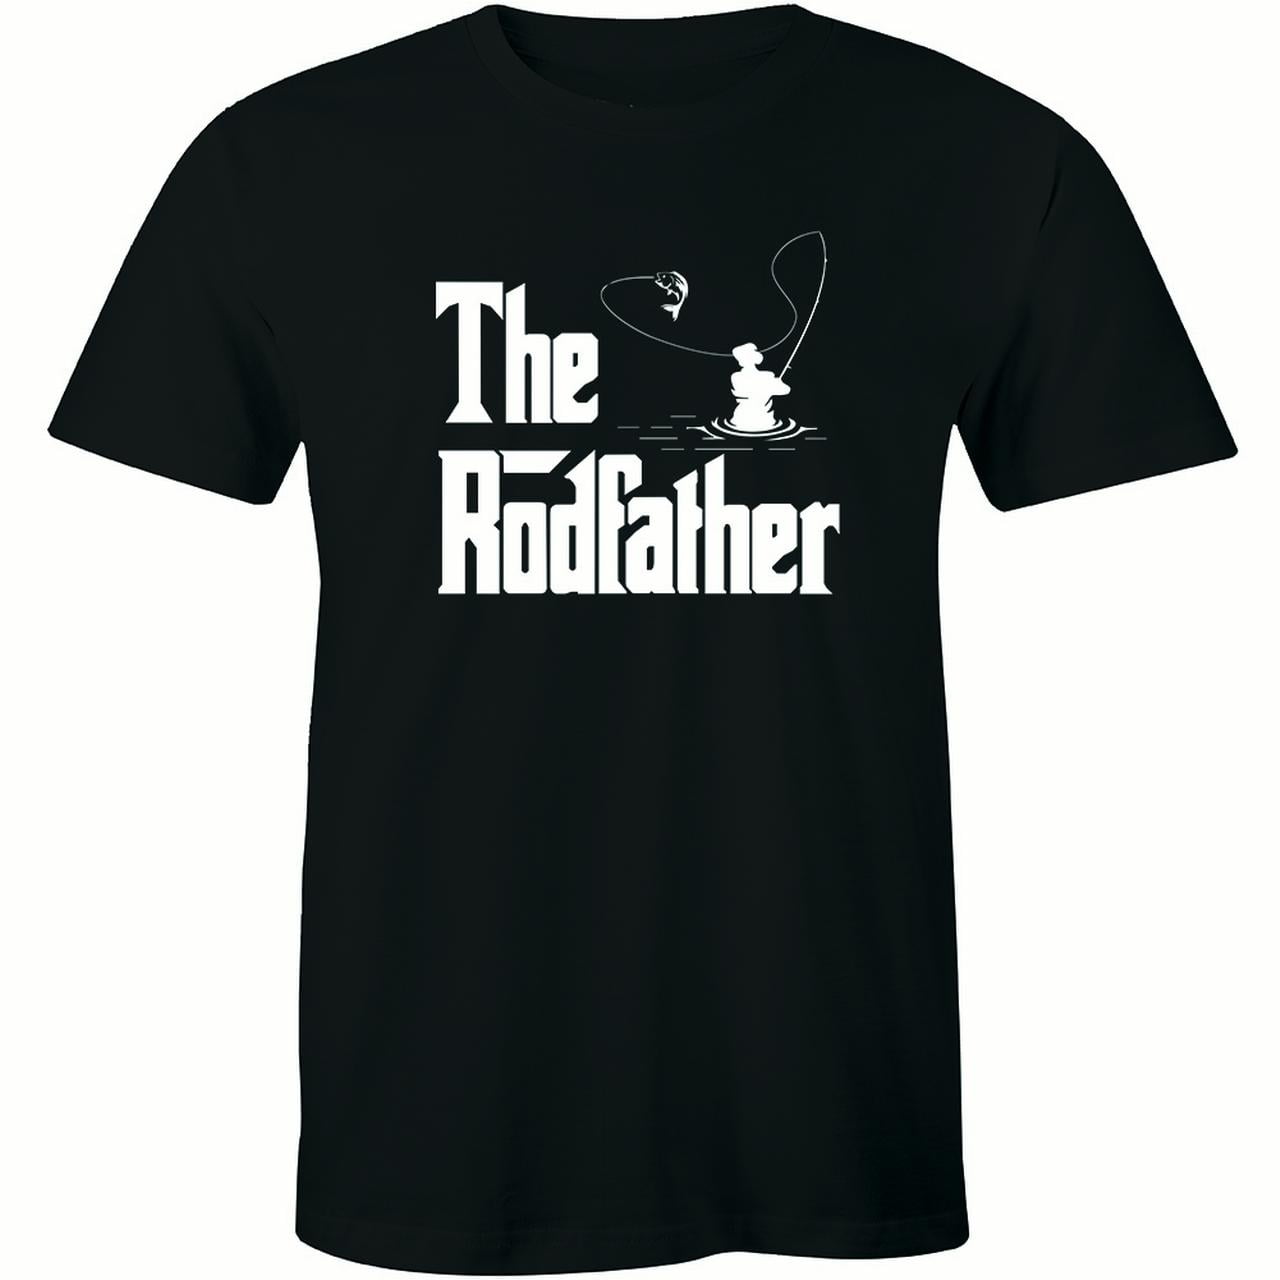 Mens Funny Fishing T-Shirt Rod Father Fathers Day Dad Fish Reel The Rodfather